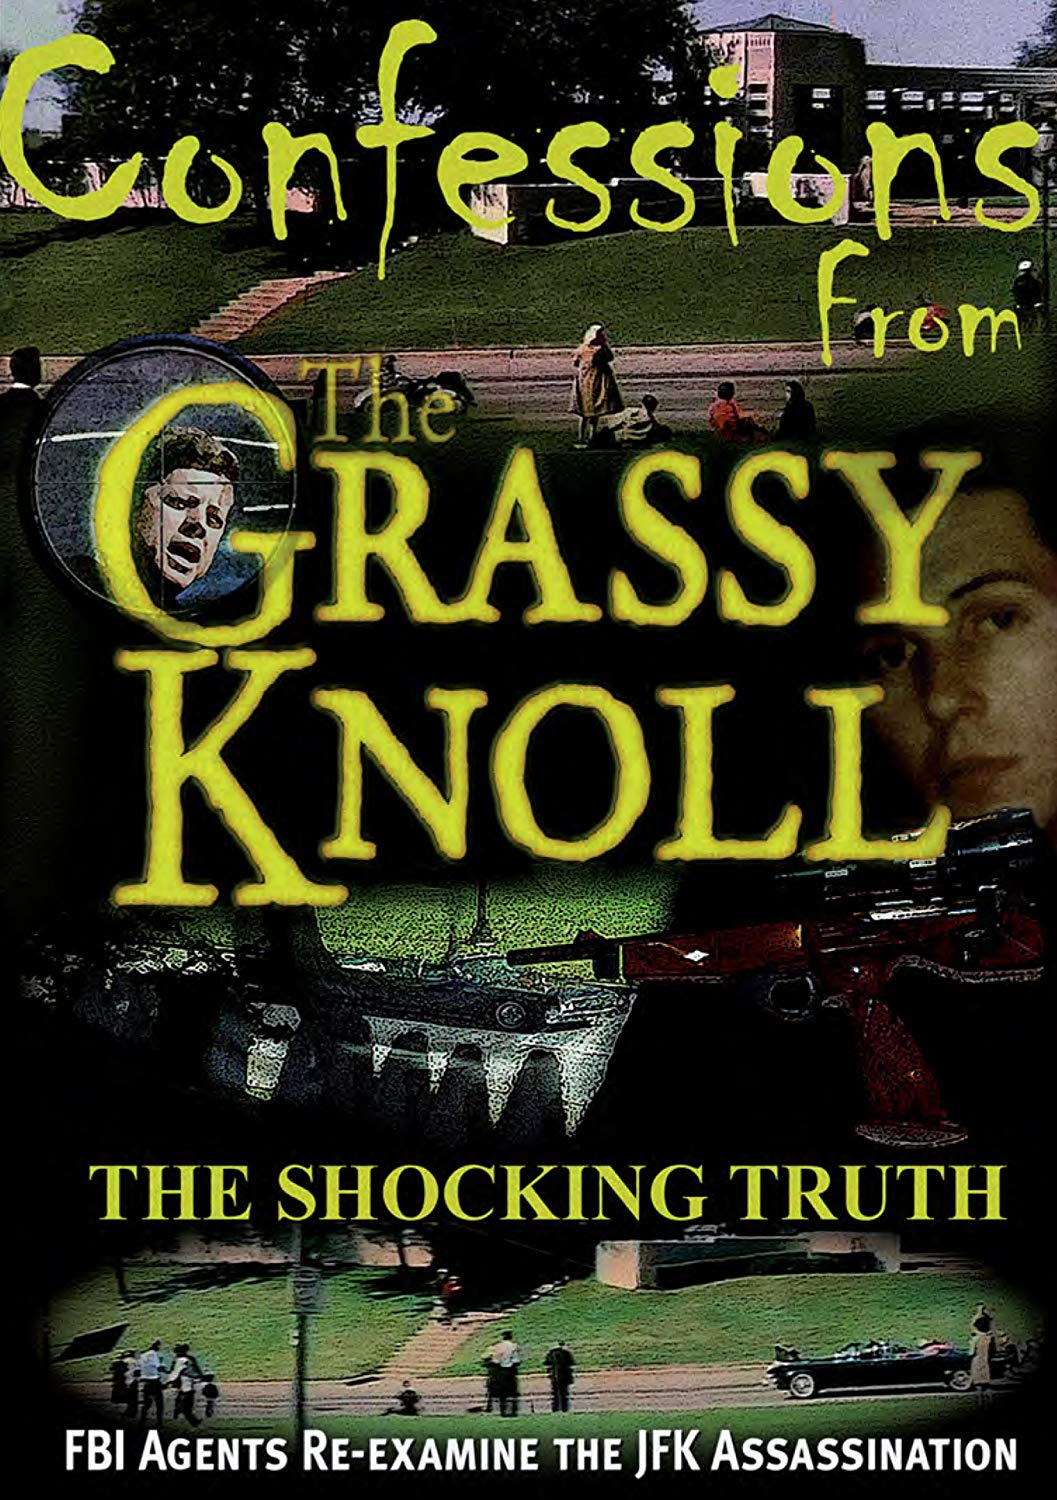 Confessions from the grassy knoll: the shocking truth [Videodisco digital]